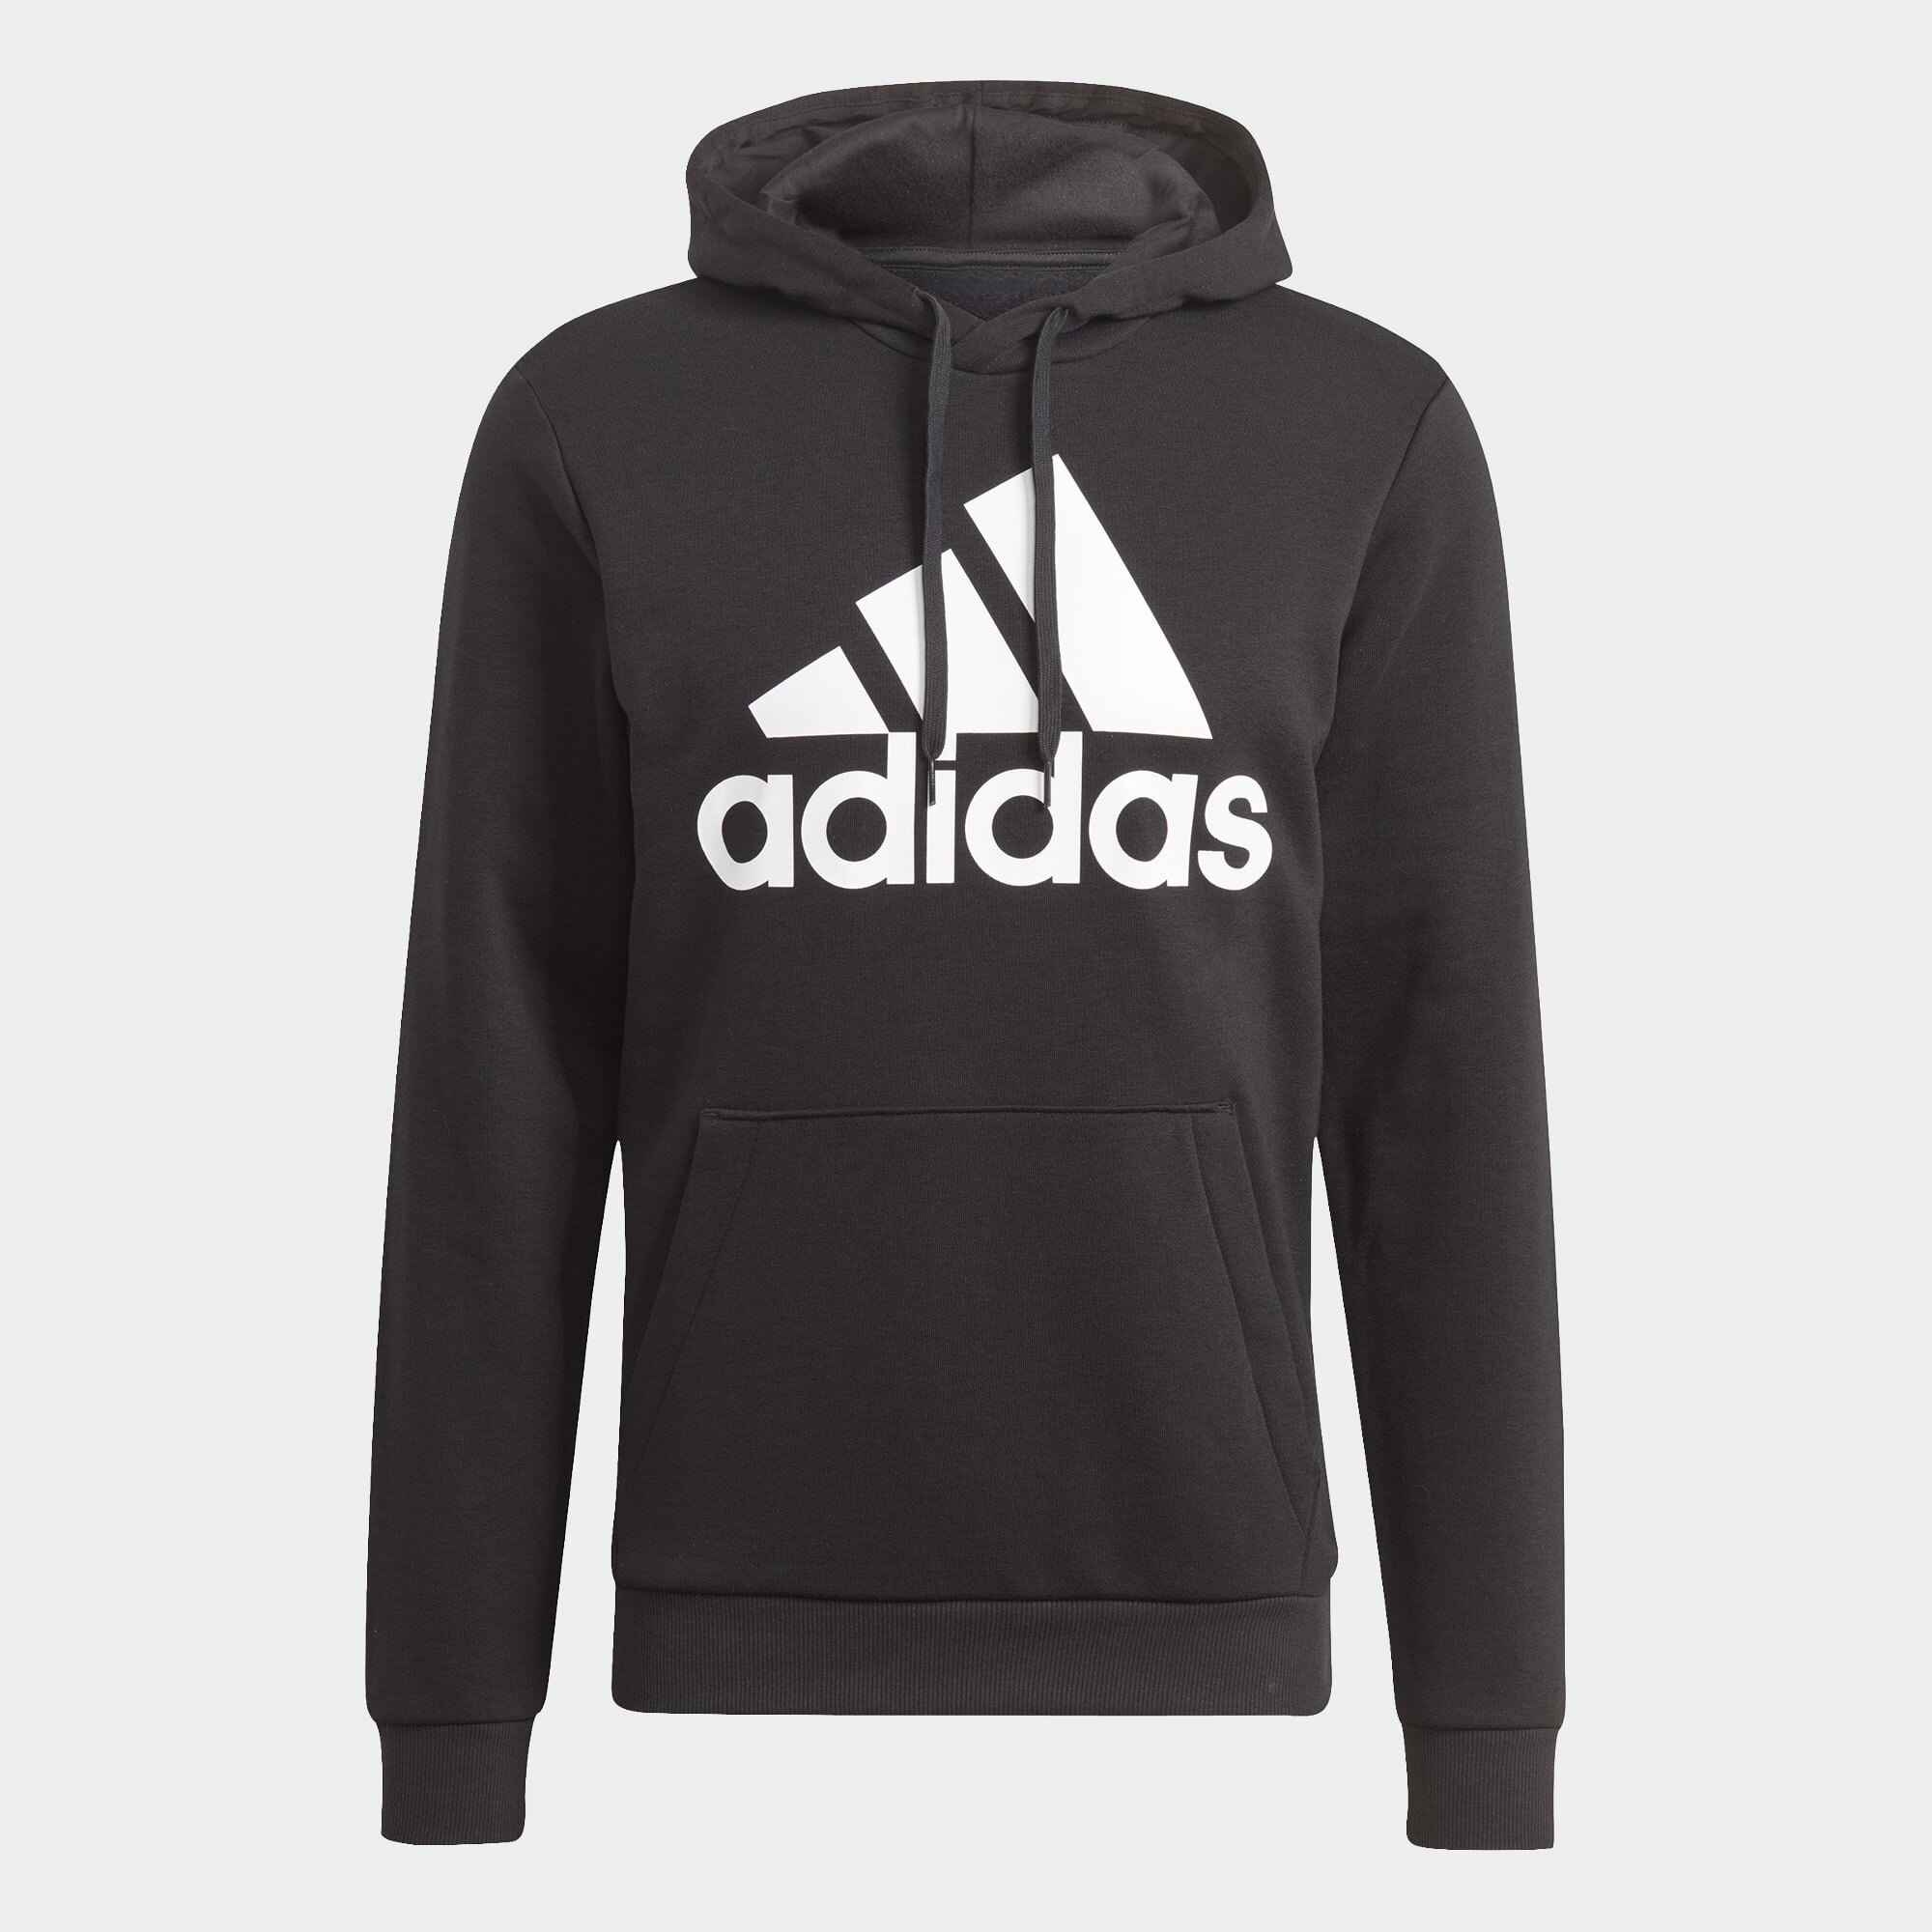 Adidas Linear Hooded Sweat Mens - Buy Online - Ph: 1800-370-766 - AfterPay  \u0026 ZipPay Available!